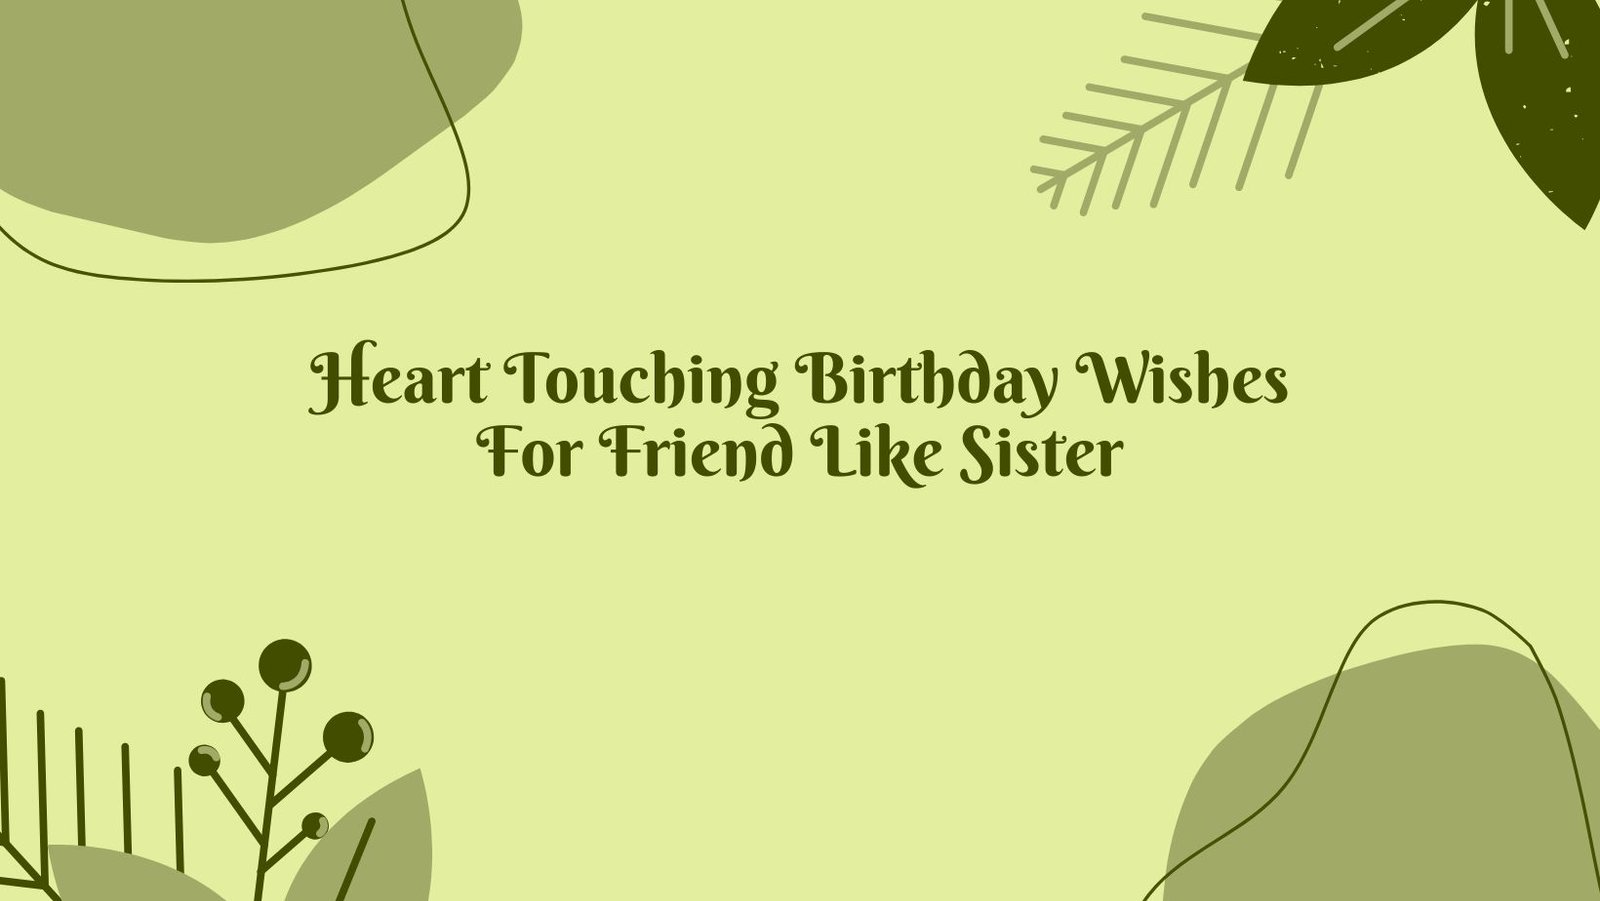 Heart Touching Birthday Wishes For Friend Like Sister